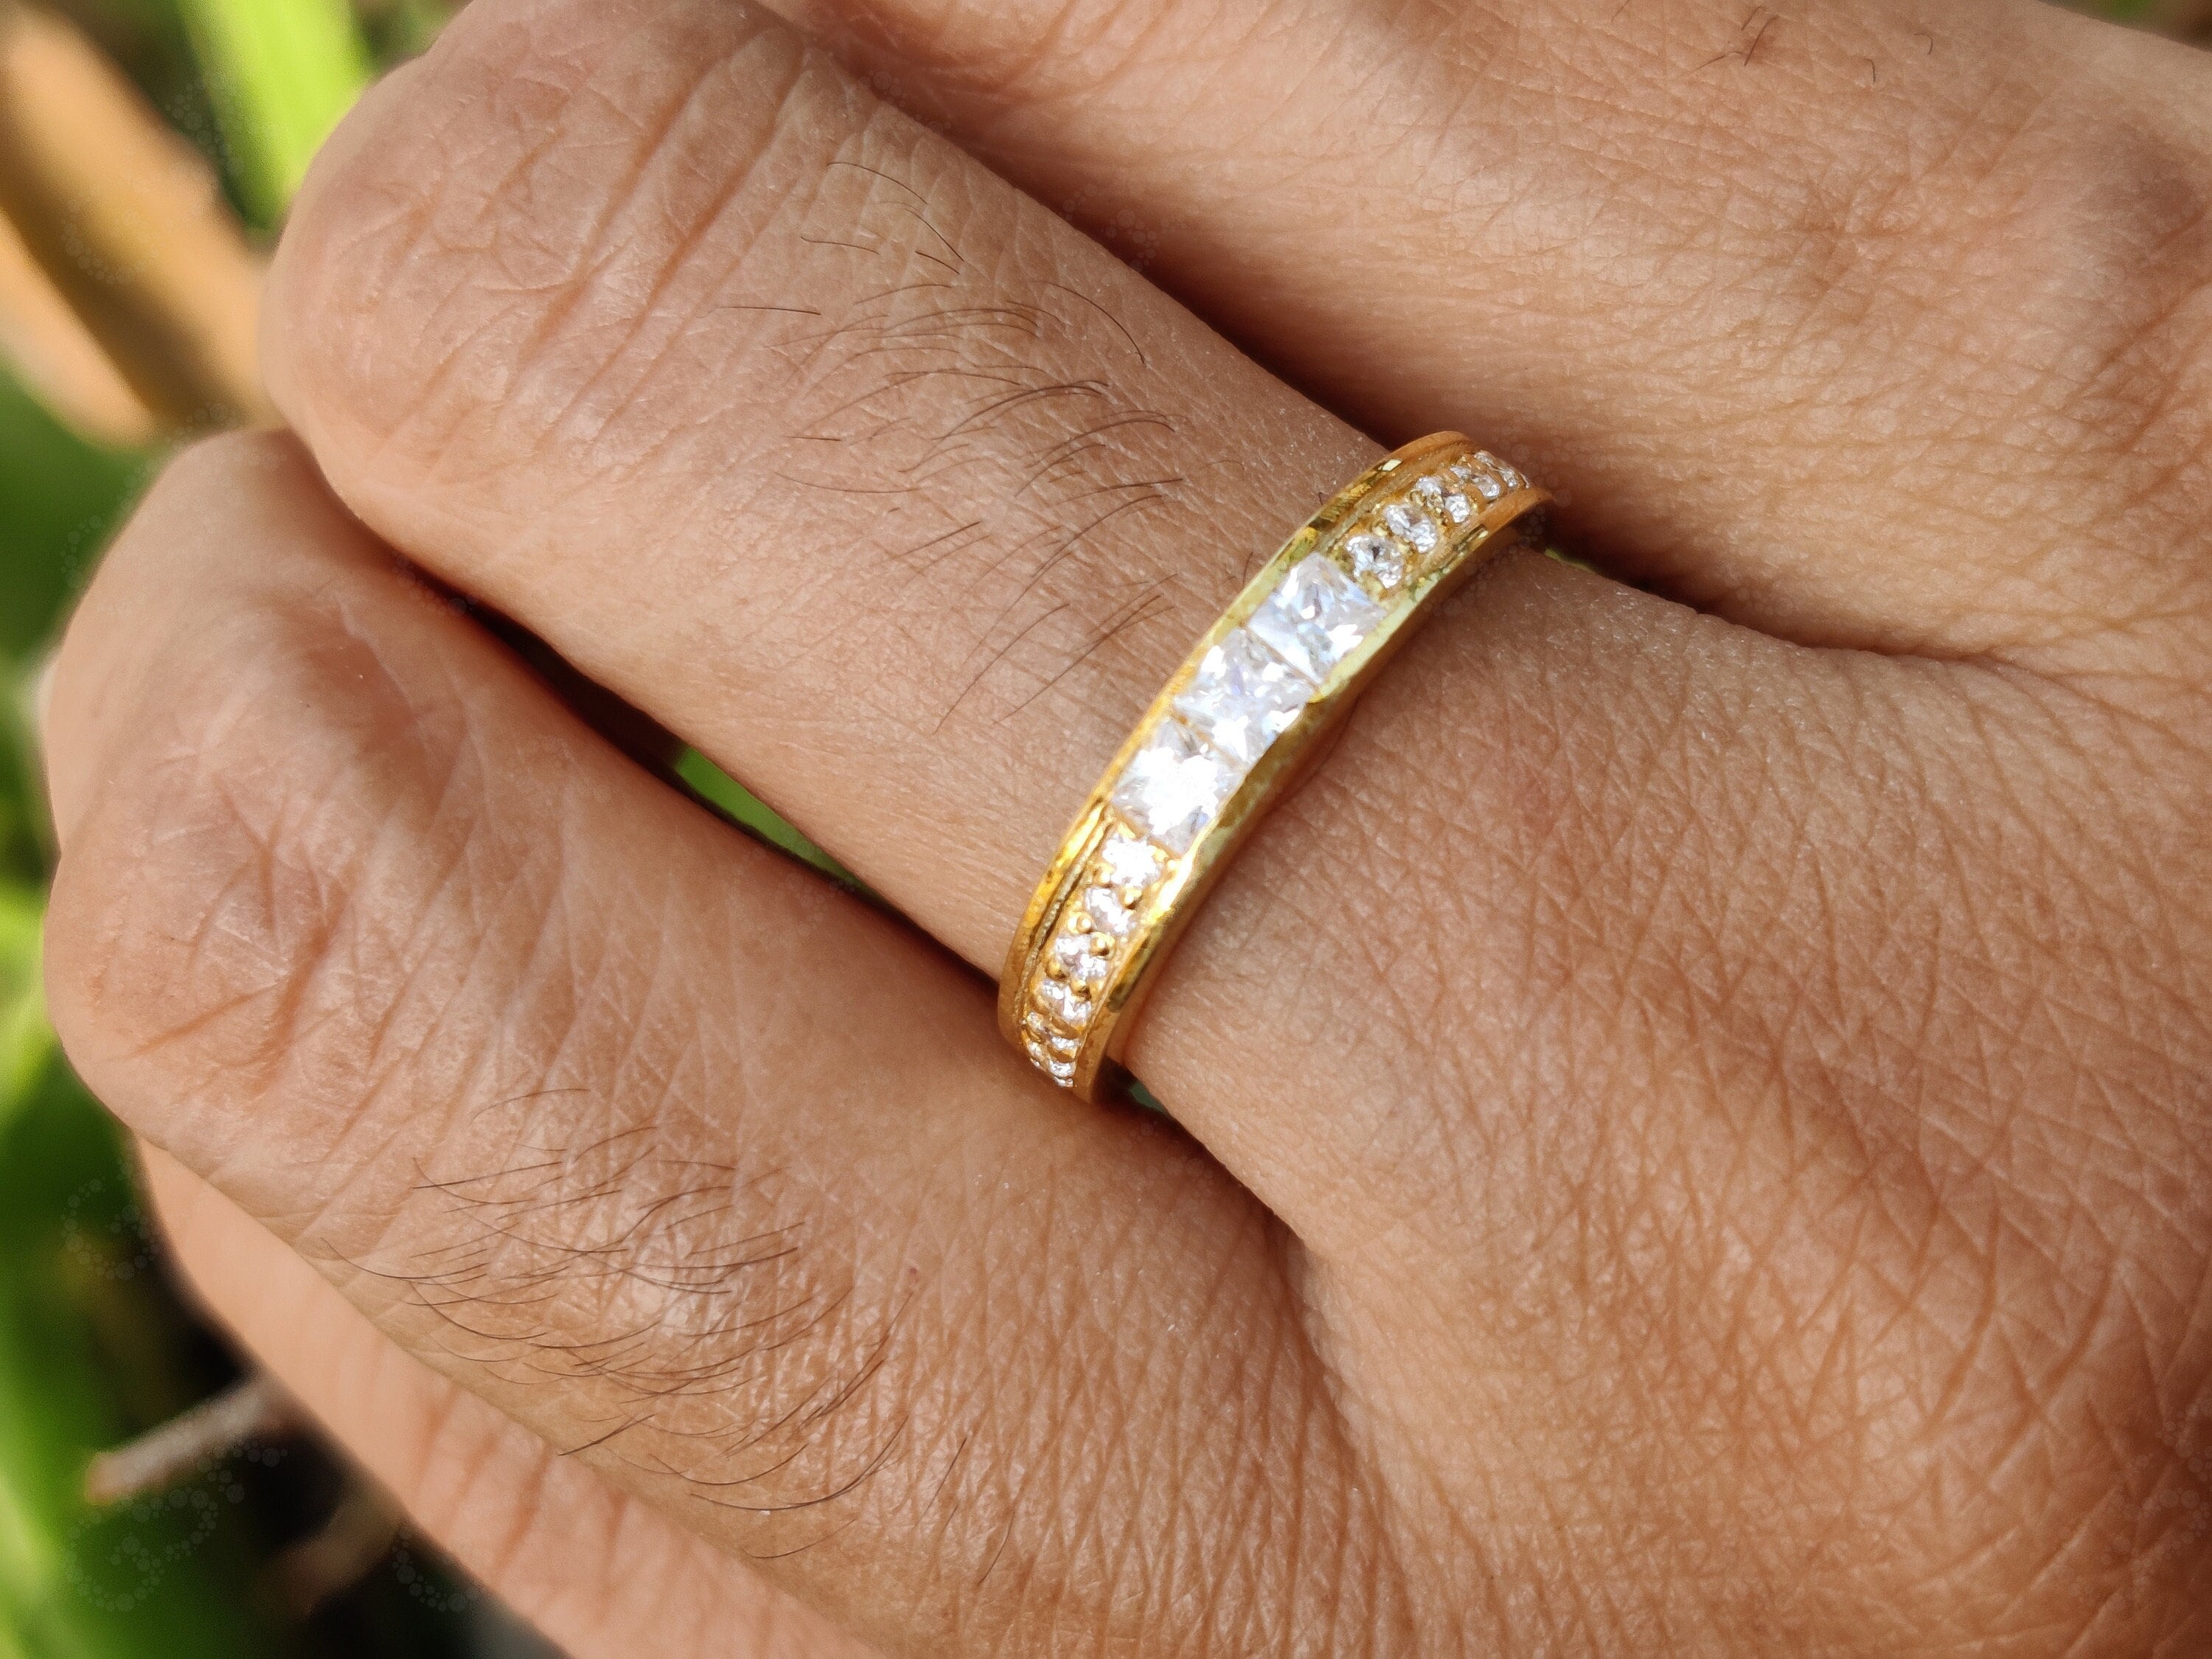 Princess Moissanite Anniversary Ring - Elevate Your Wedding Band Game with this Silver and Gold Beauty, a Stackable Promise Ring Perfectly Designed for Women, Complete with a Matching Band